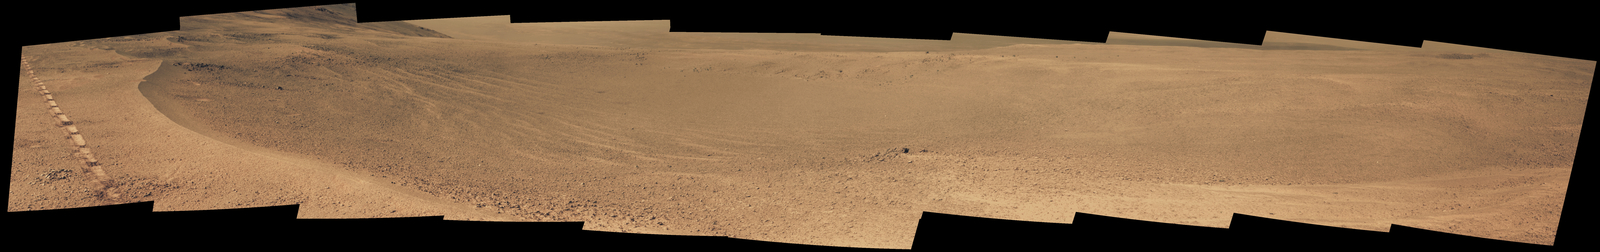 NASA's Opportunity Mars rover passed near this small, relatively fresh crater in April 2017, during the 45th anniversary of the Apollo 16 mission to the moon. The rover team chose to call it "Orion Crater," after the Apollo 16 lunar module. The rover's Panoramic Camera (Pancam) recorded this view.